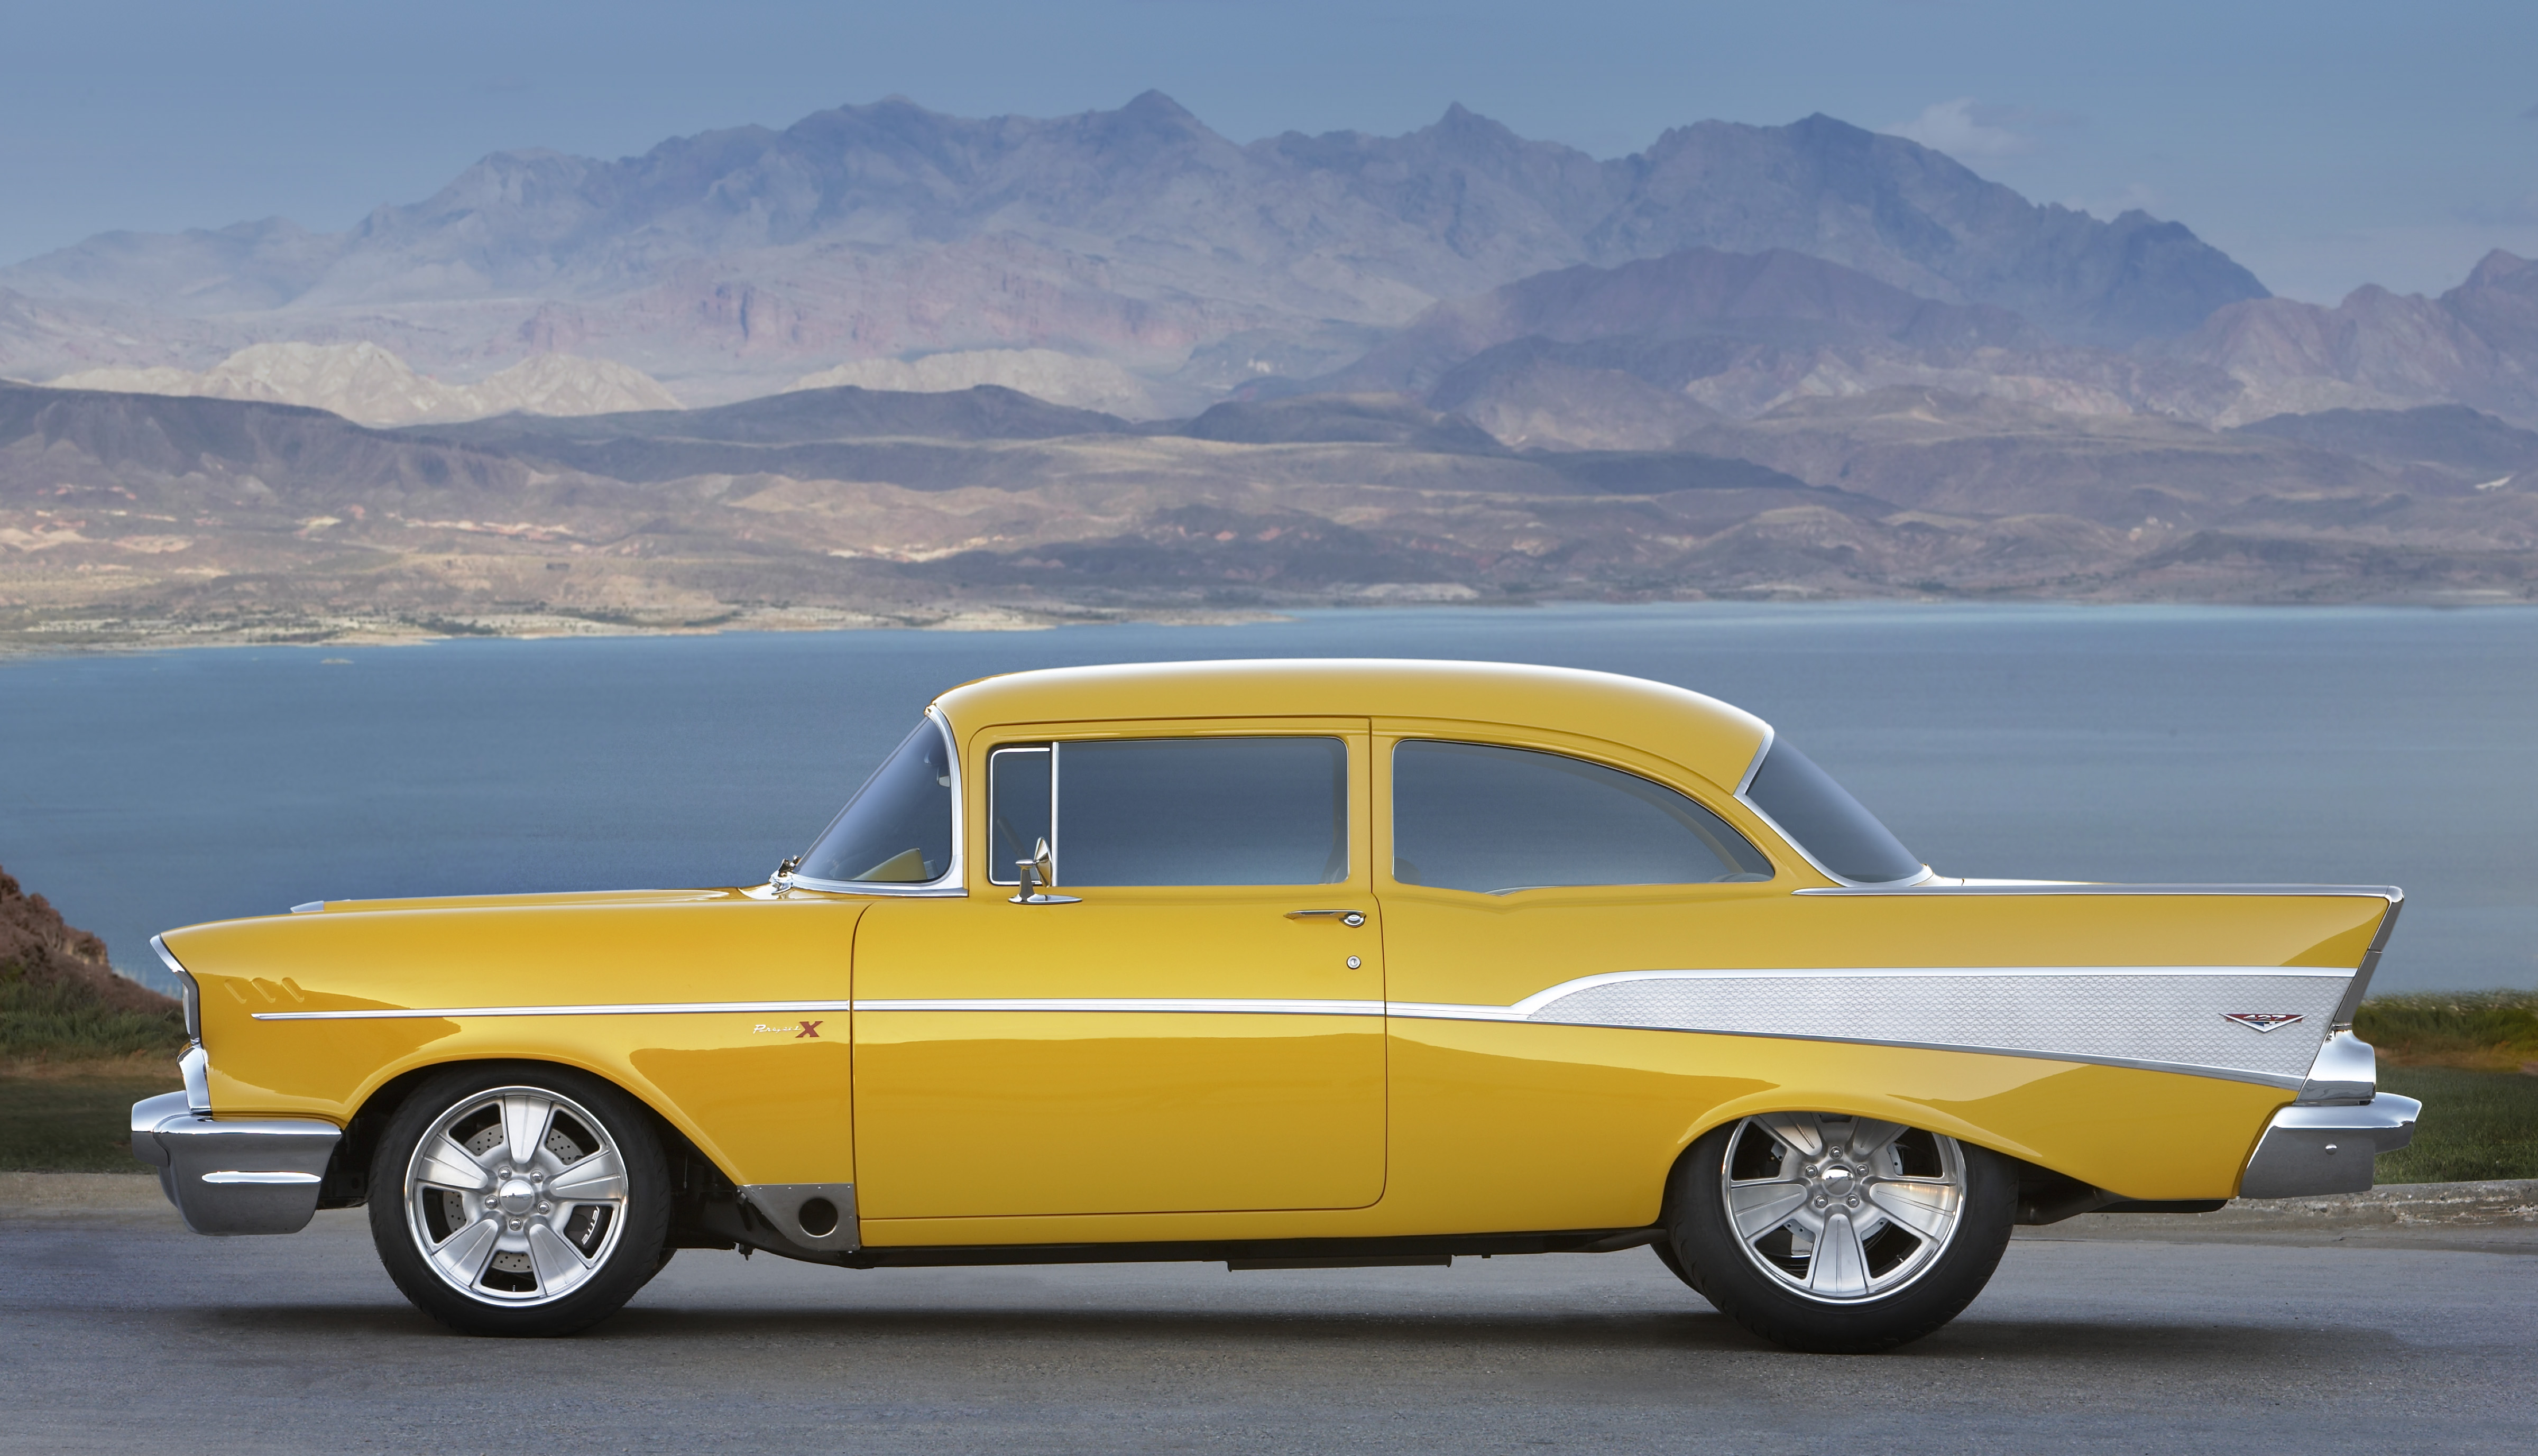 Your Ridiculously Awesome Chevy Bel Air Wallpaper Is Here